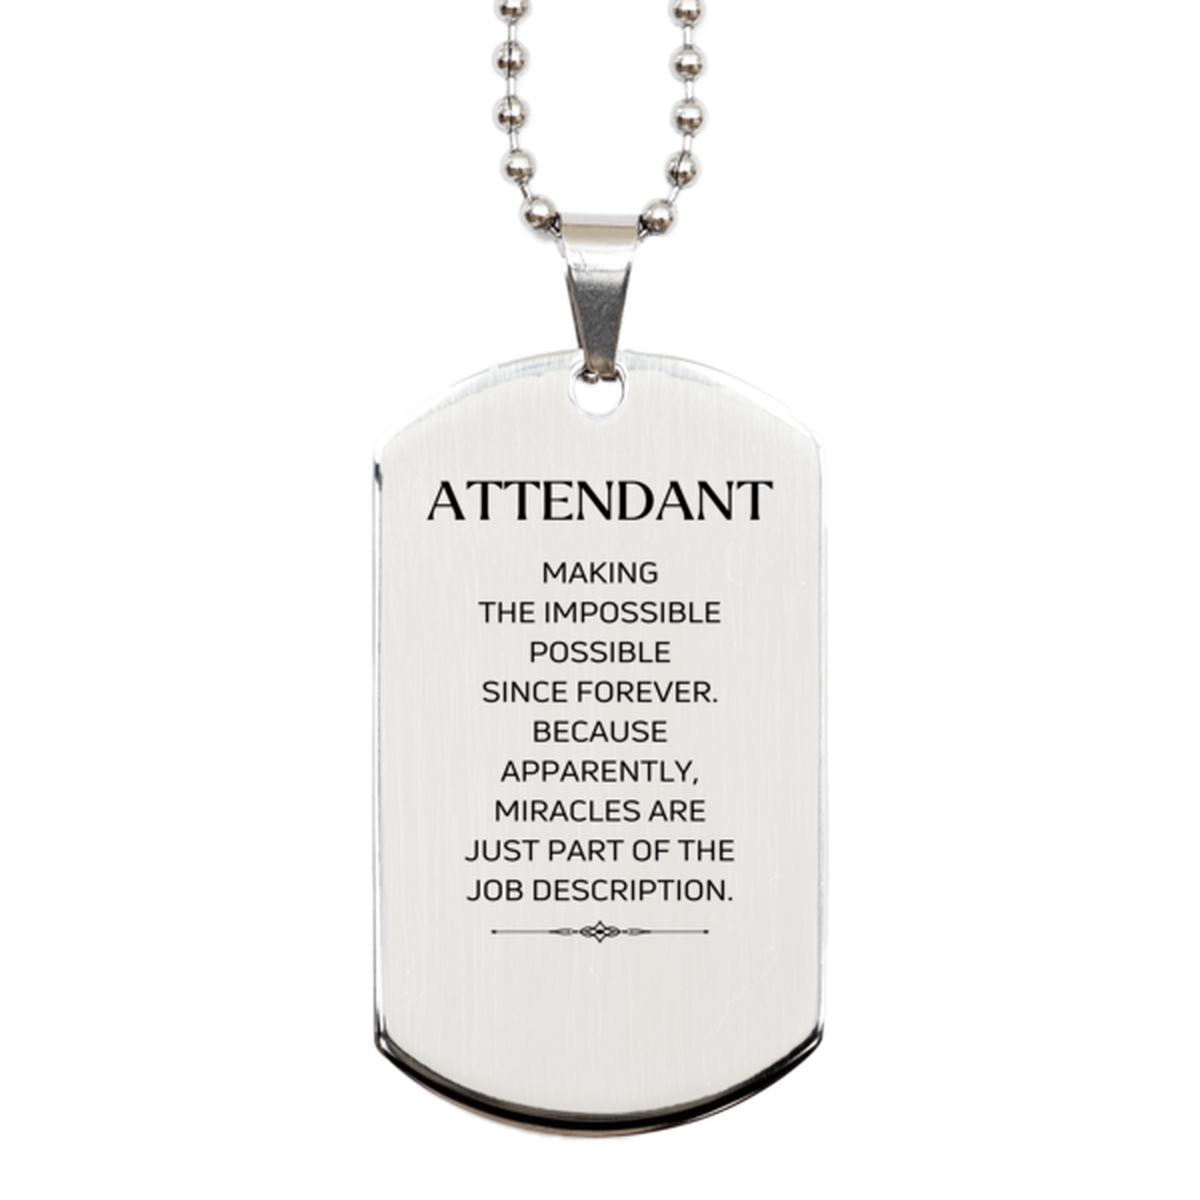 Funny Attendant Gifts, Miracles are just part of the job description, Inspirational Birthday Silver Dog Tag For Attendant, Men, Women, Coworkers, Friends, Boss